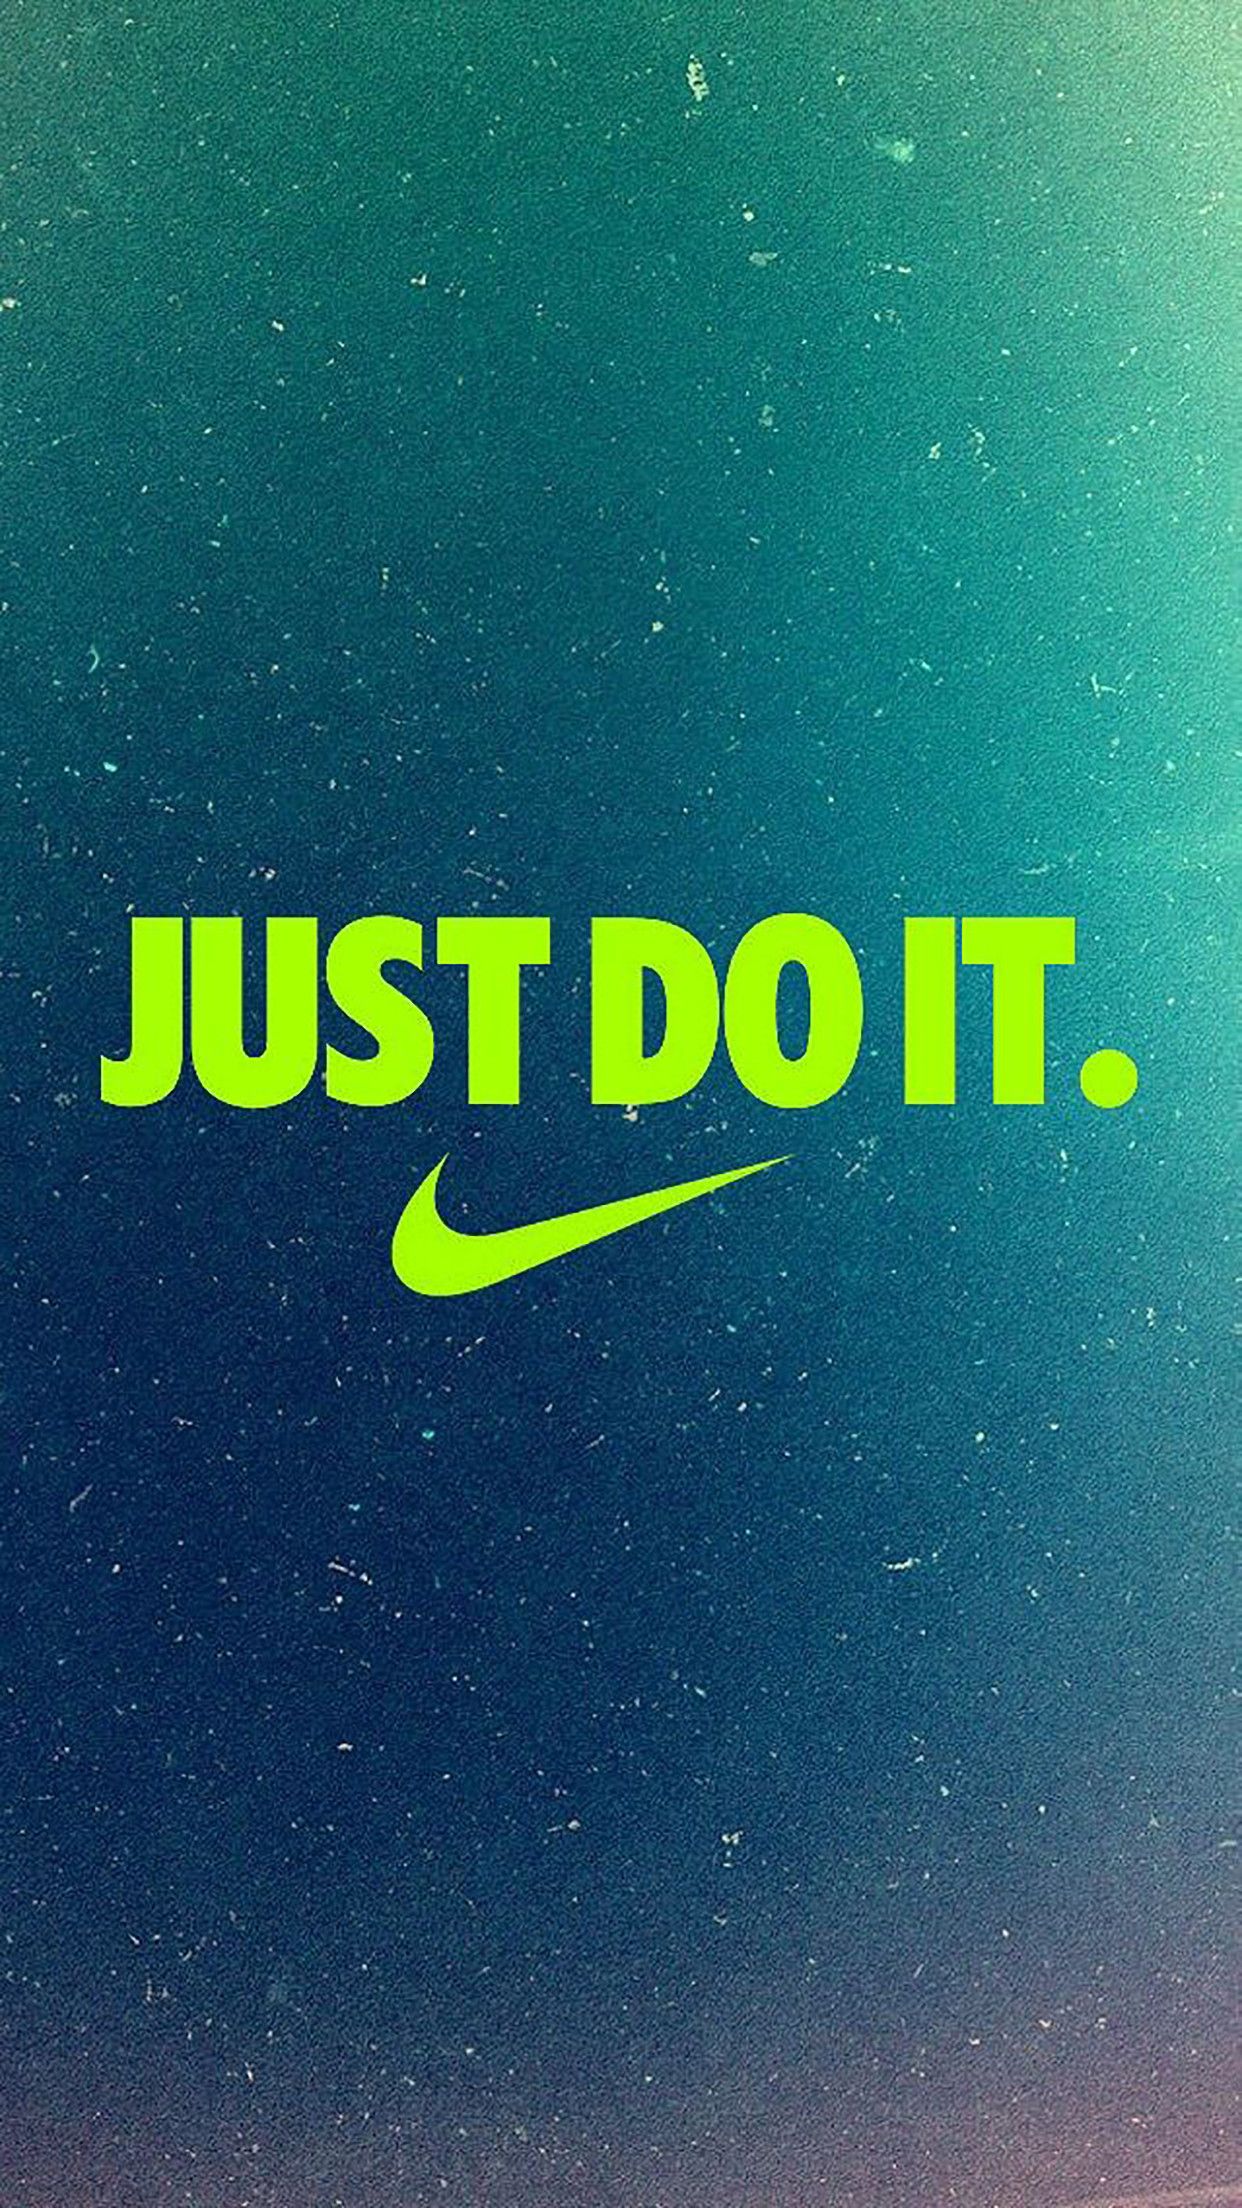 Nike Just Do It 4186 wallpaper in 1280x720 resolution